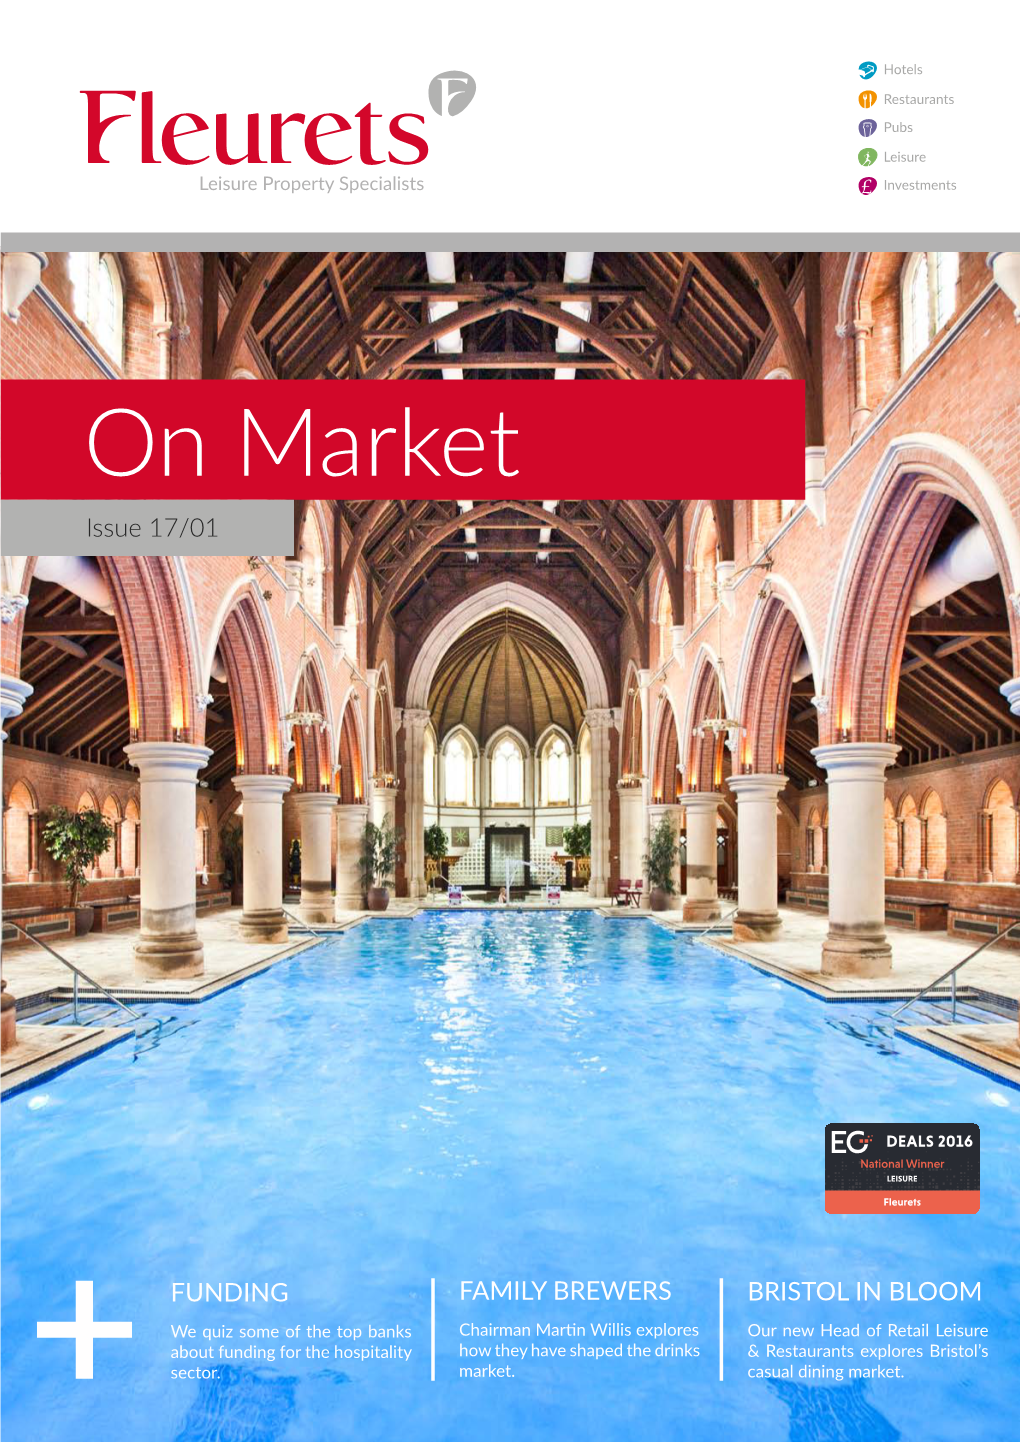 On Market Issue 17/01